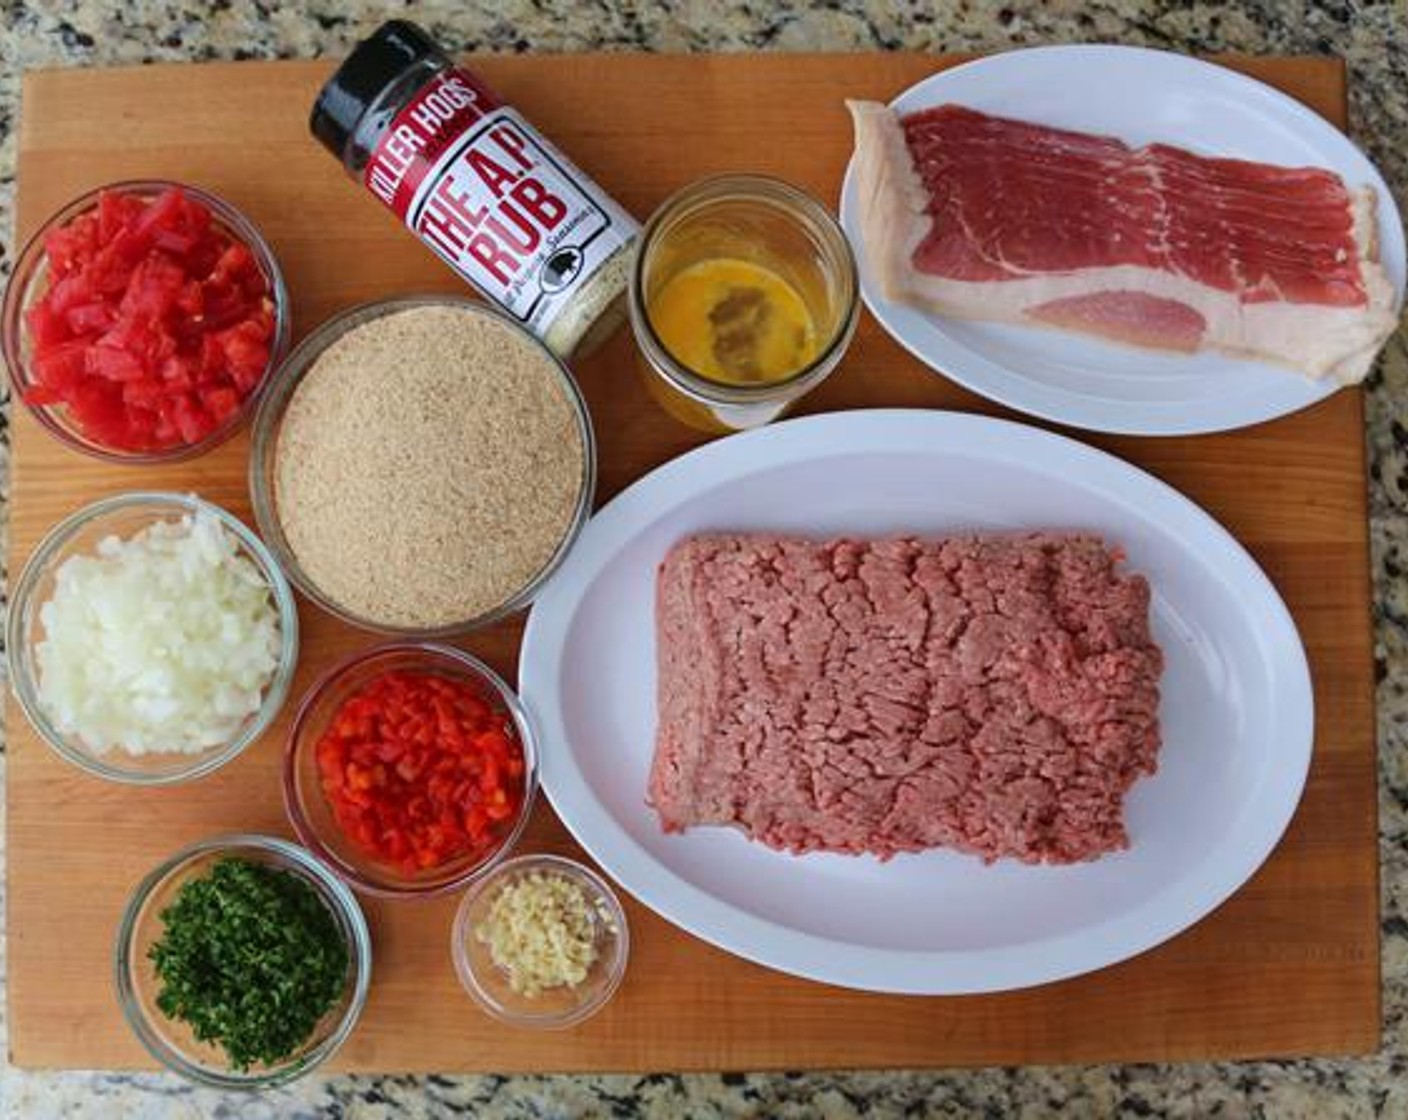 step 2 In a large bowl combine 80/20 Lean Ground Beef (2 lb), Breadcrumbs (2 cups), Onion (1 cup), Tomato (1 cup), Pimiento Pepper (1/4 cup), Fresh Parsley (1/4 cup), Garlic (2 cloves), Egg (1), and All-Purpose Spice Rub (1 Tbsp).